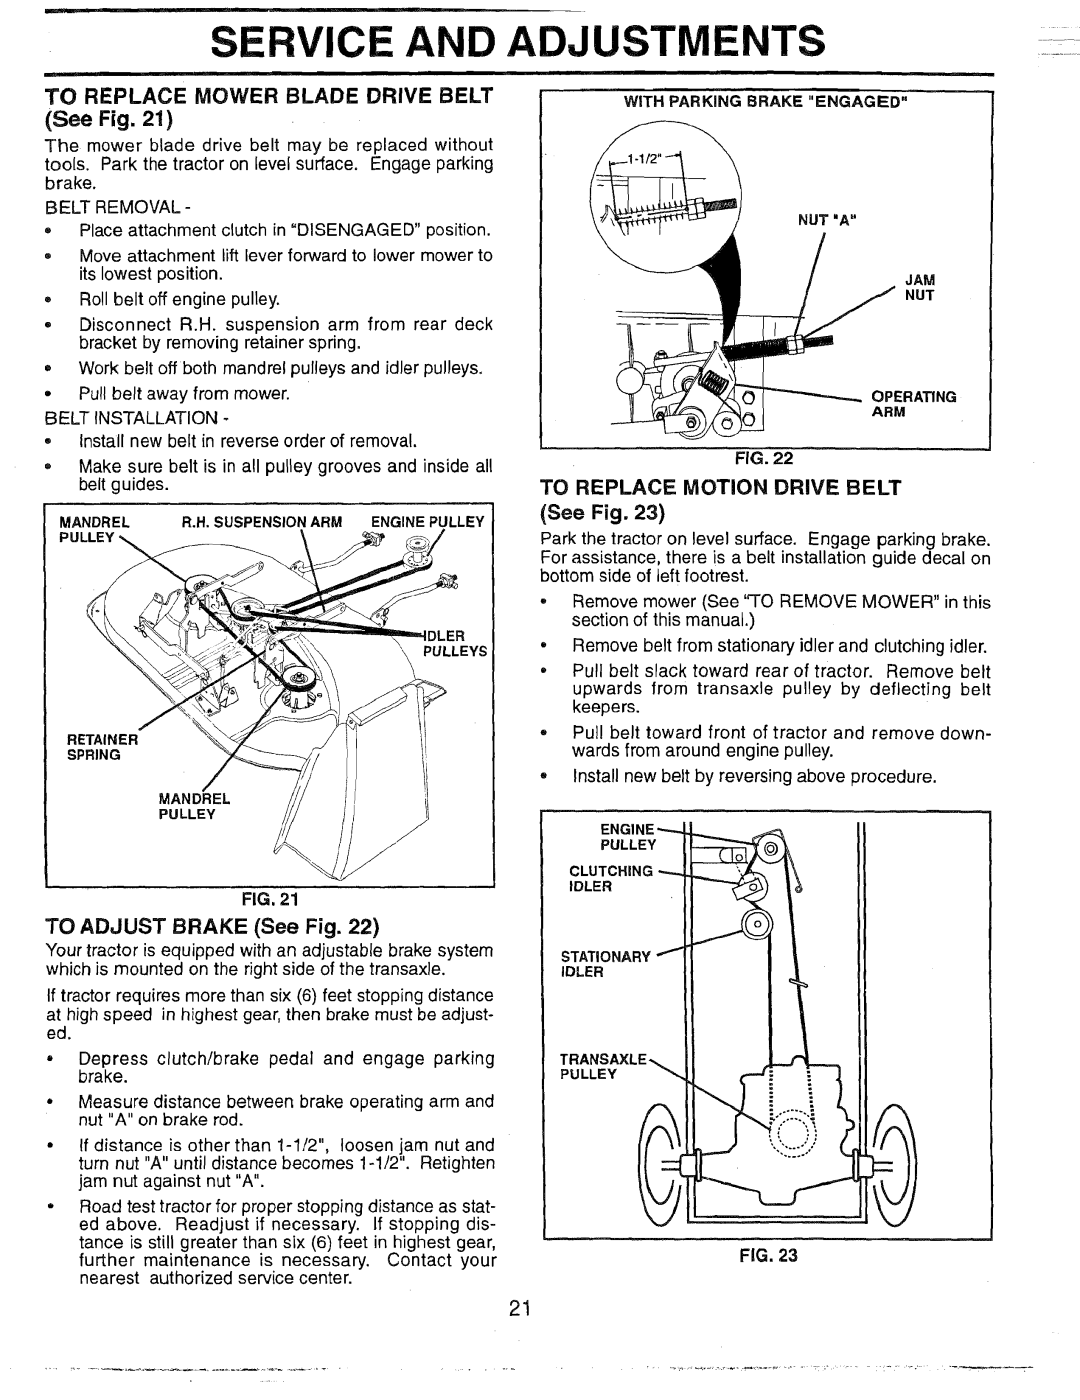 Weed Eater 165412 TO REPLACE MOWER BLADE DRIVE BELT See Fig, TO ADJUST BRAKE See Fig, TO REPLACE MOTION DRIVE BELT See Fig 